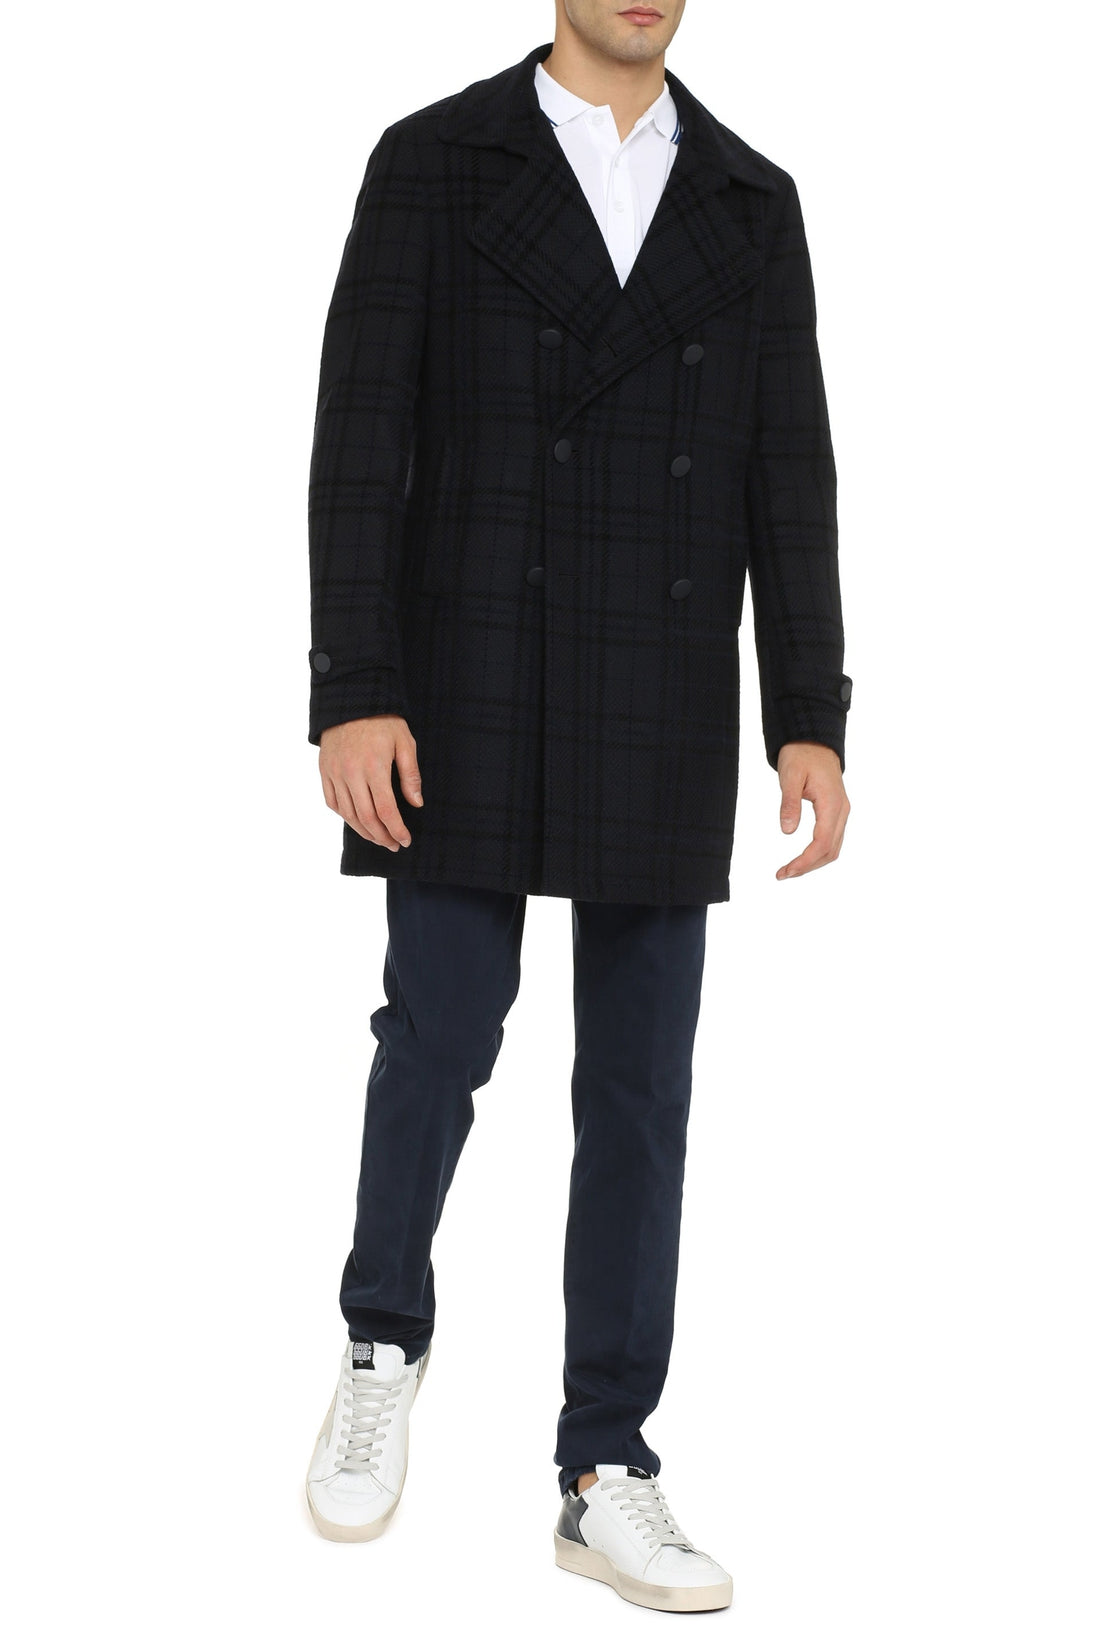 Tagliatore-OUTLET-SALE-Charlie double-breasted coat-ARCHIVIST